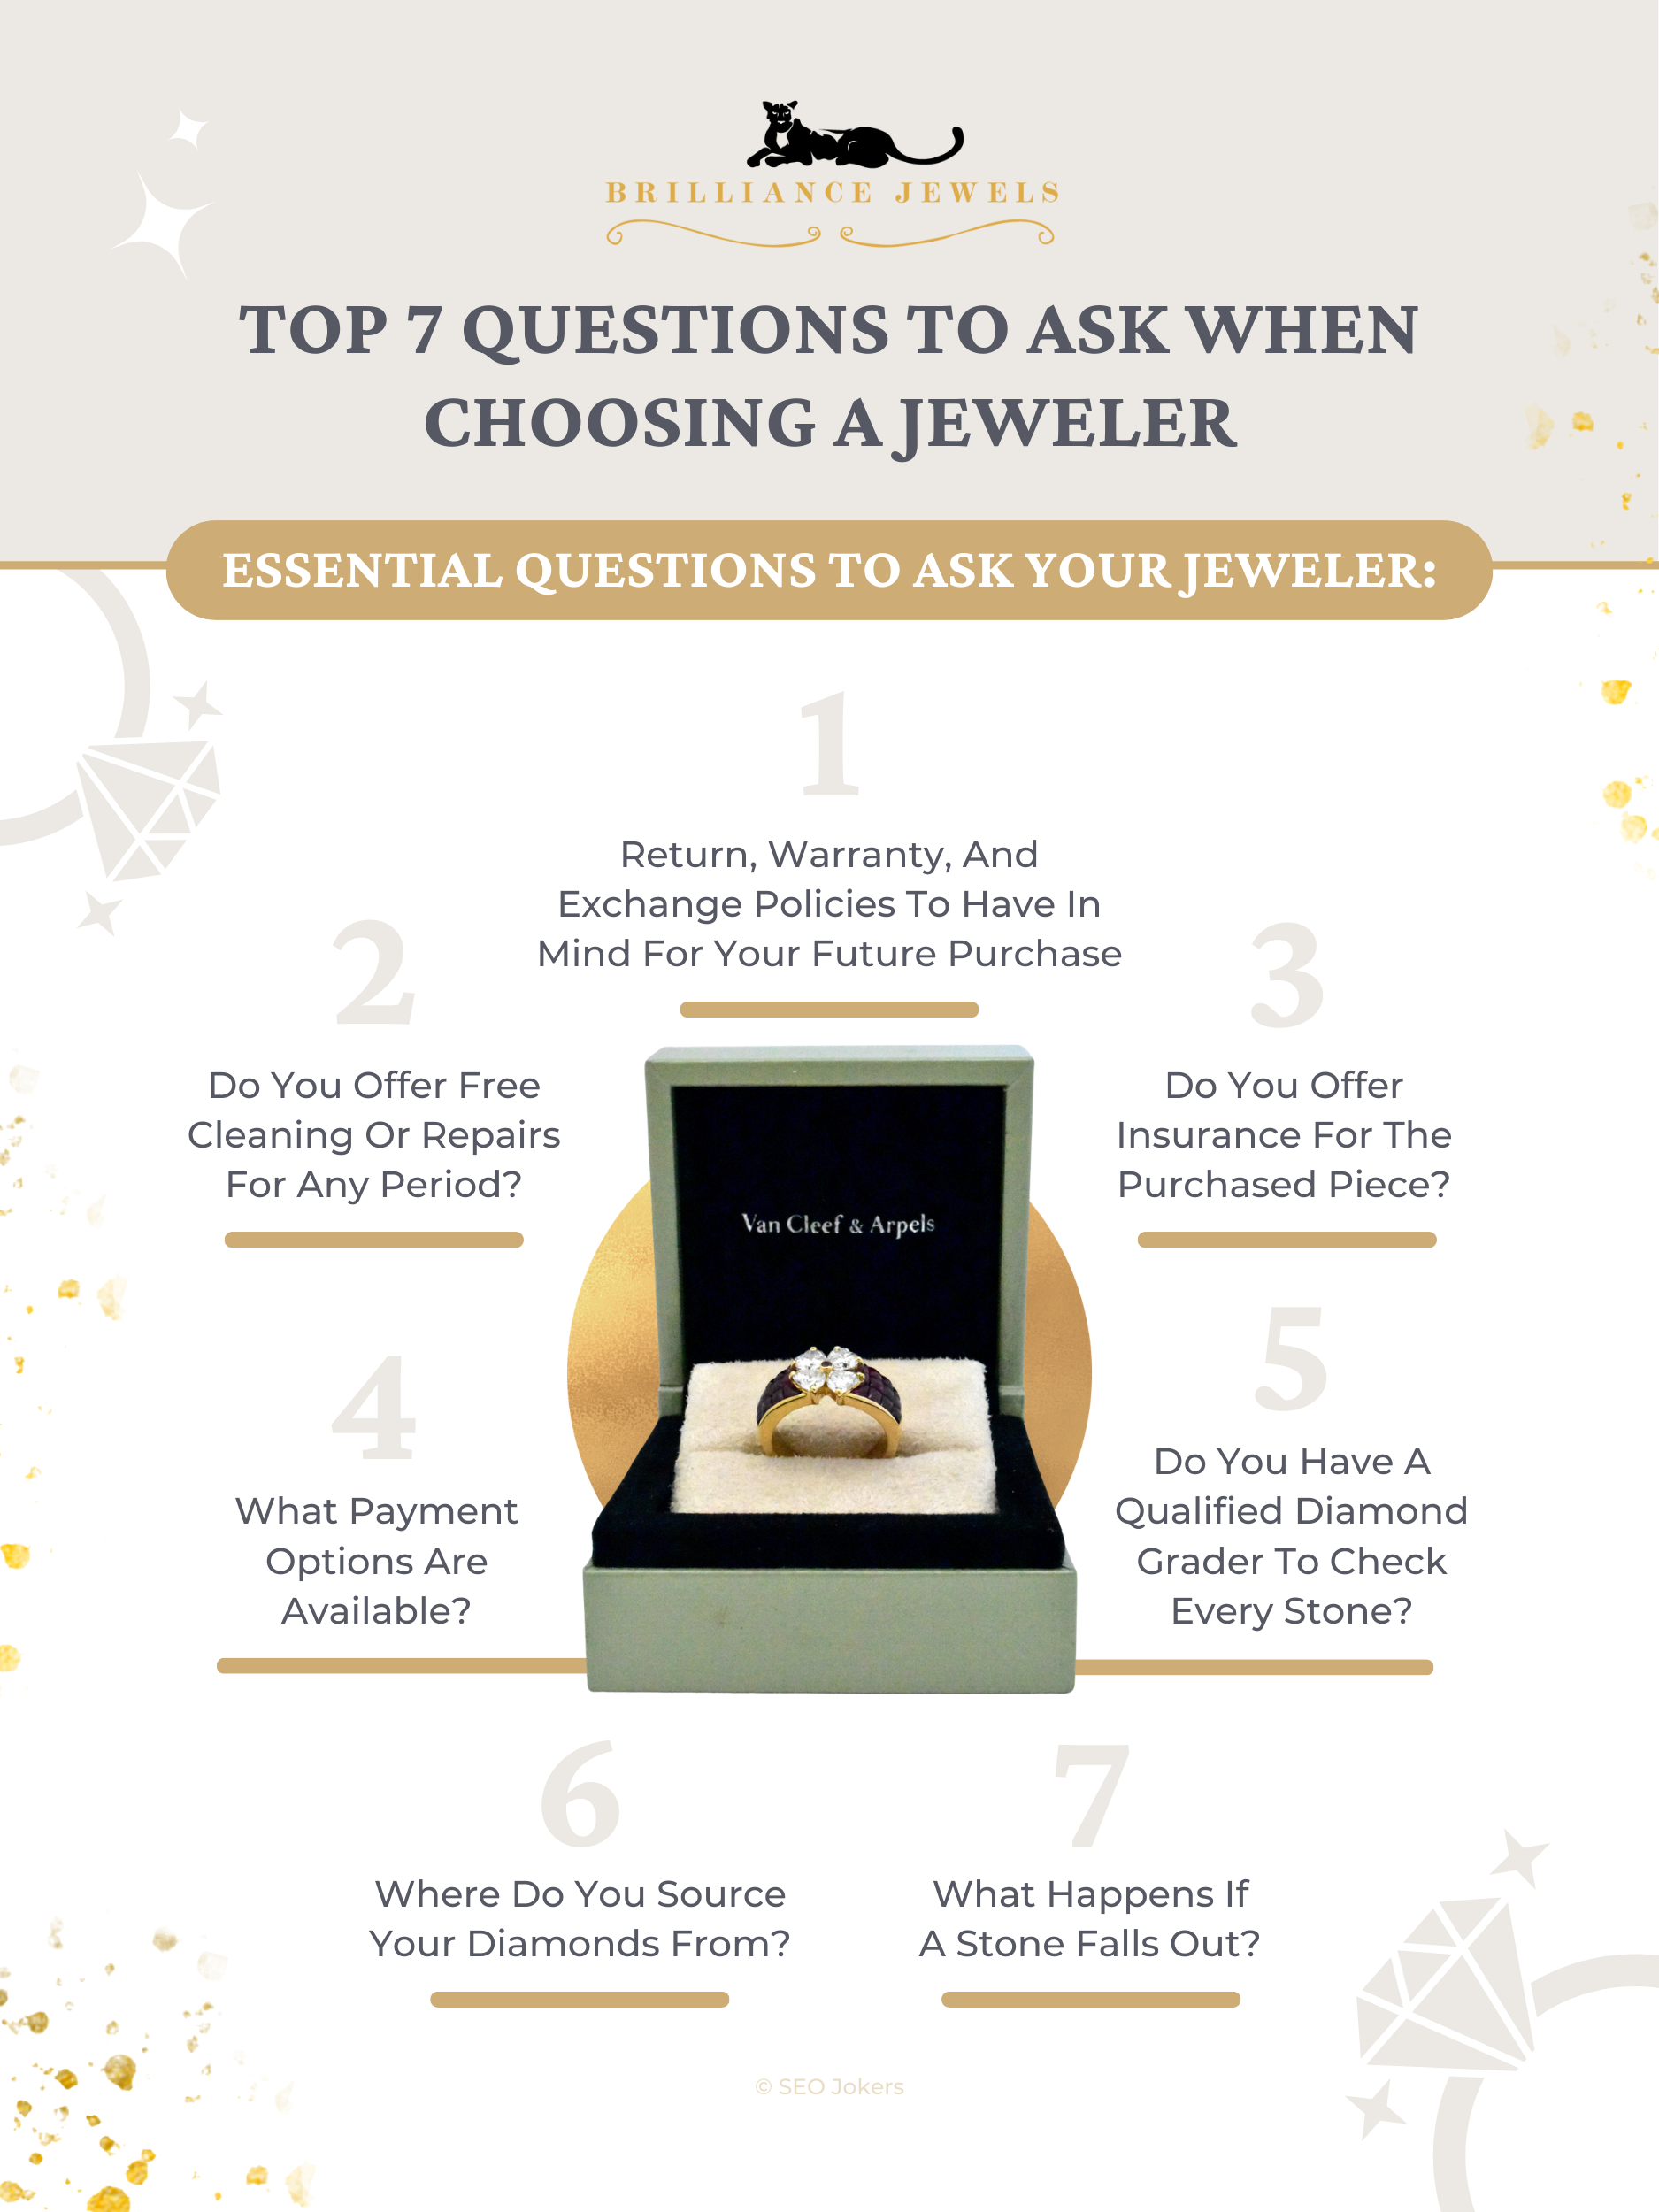 Top 7 Questions To Ask When Choosing A Jeweler